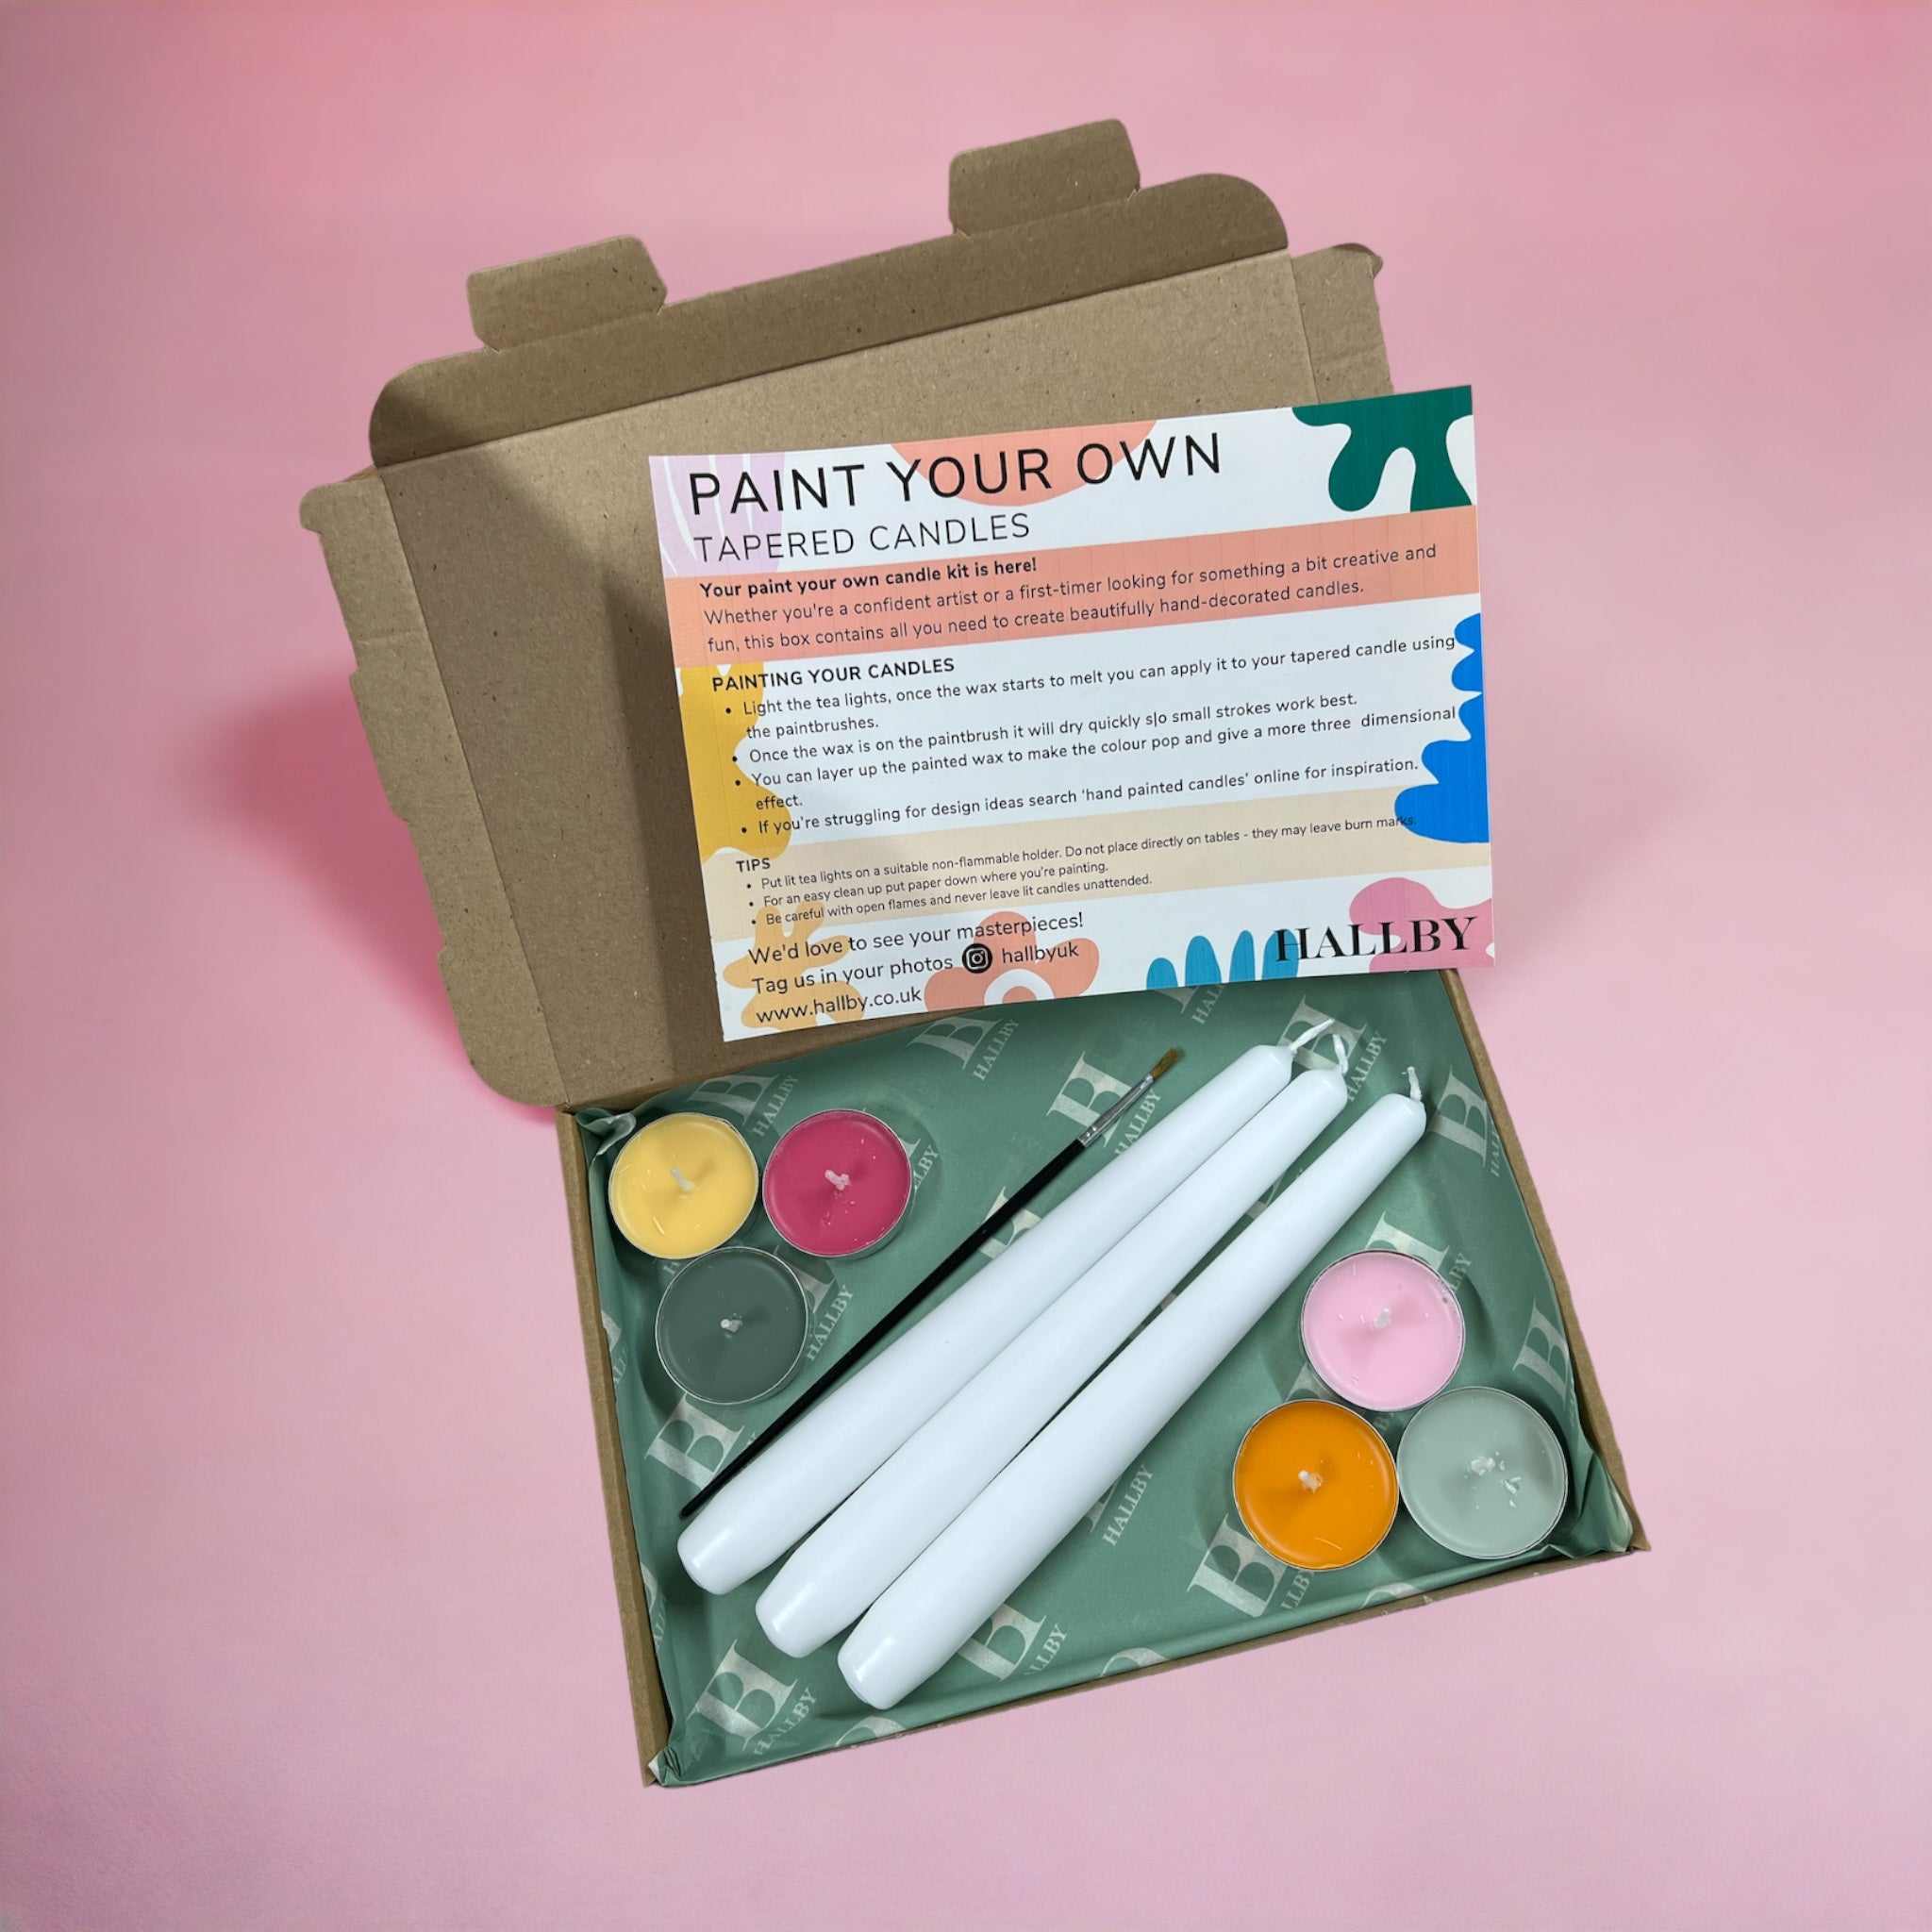 Paint your own candles kit - Summer